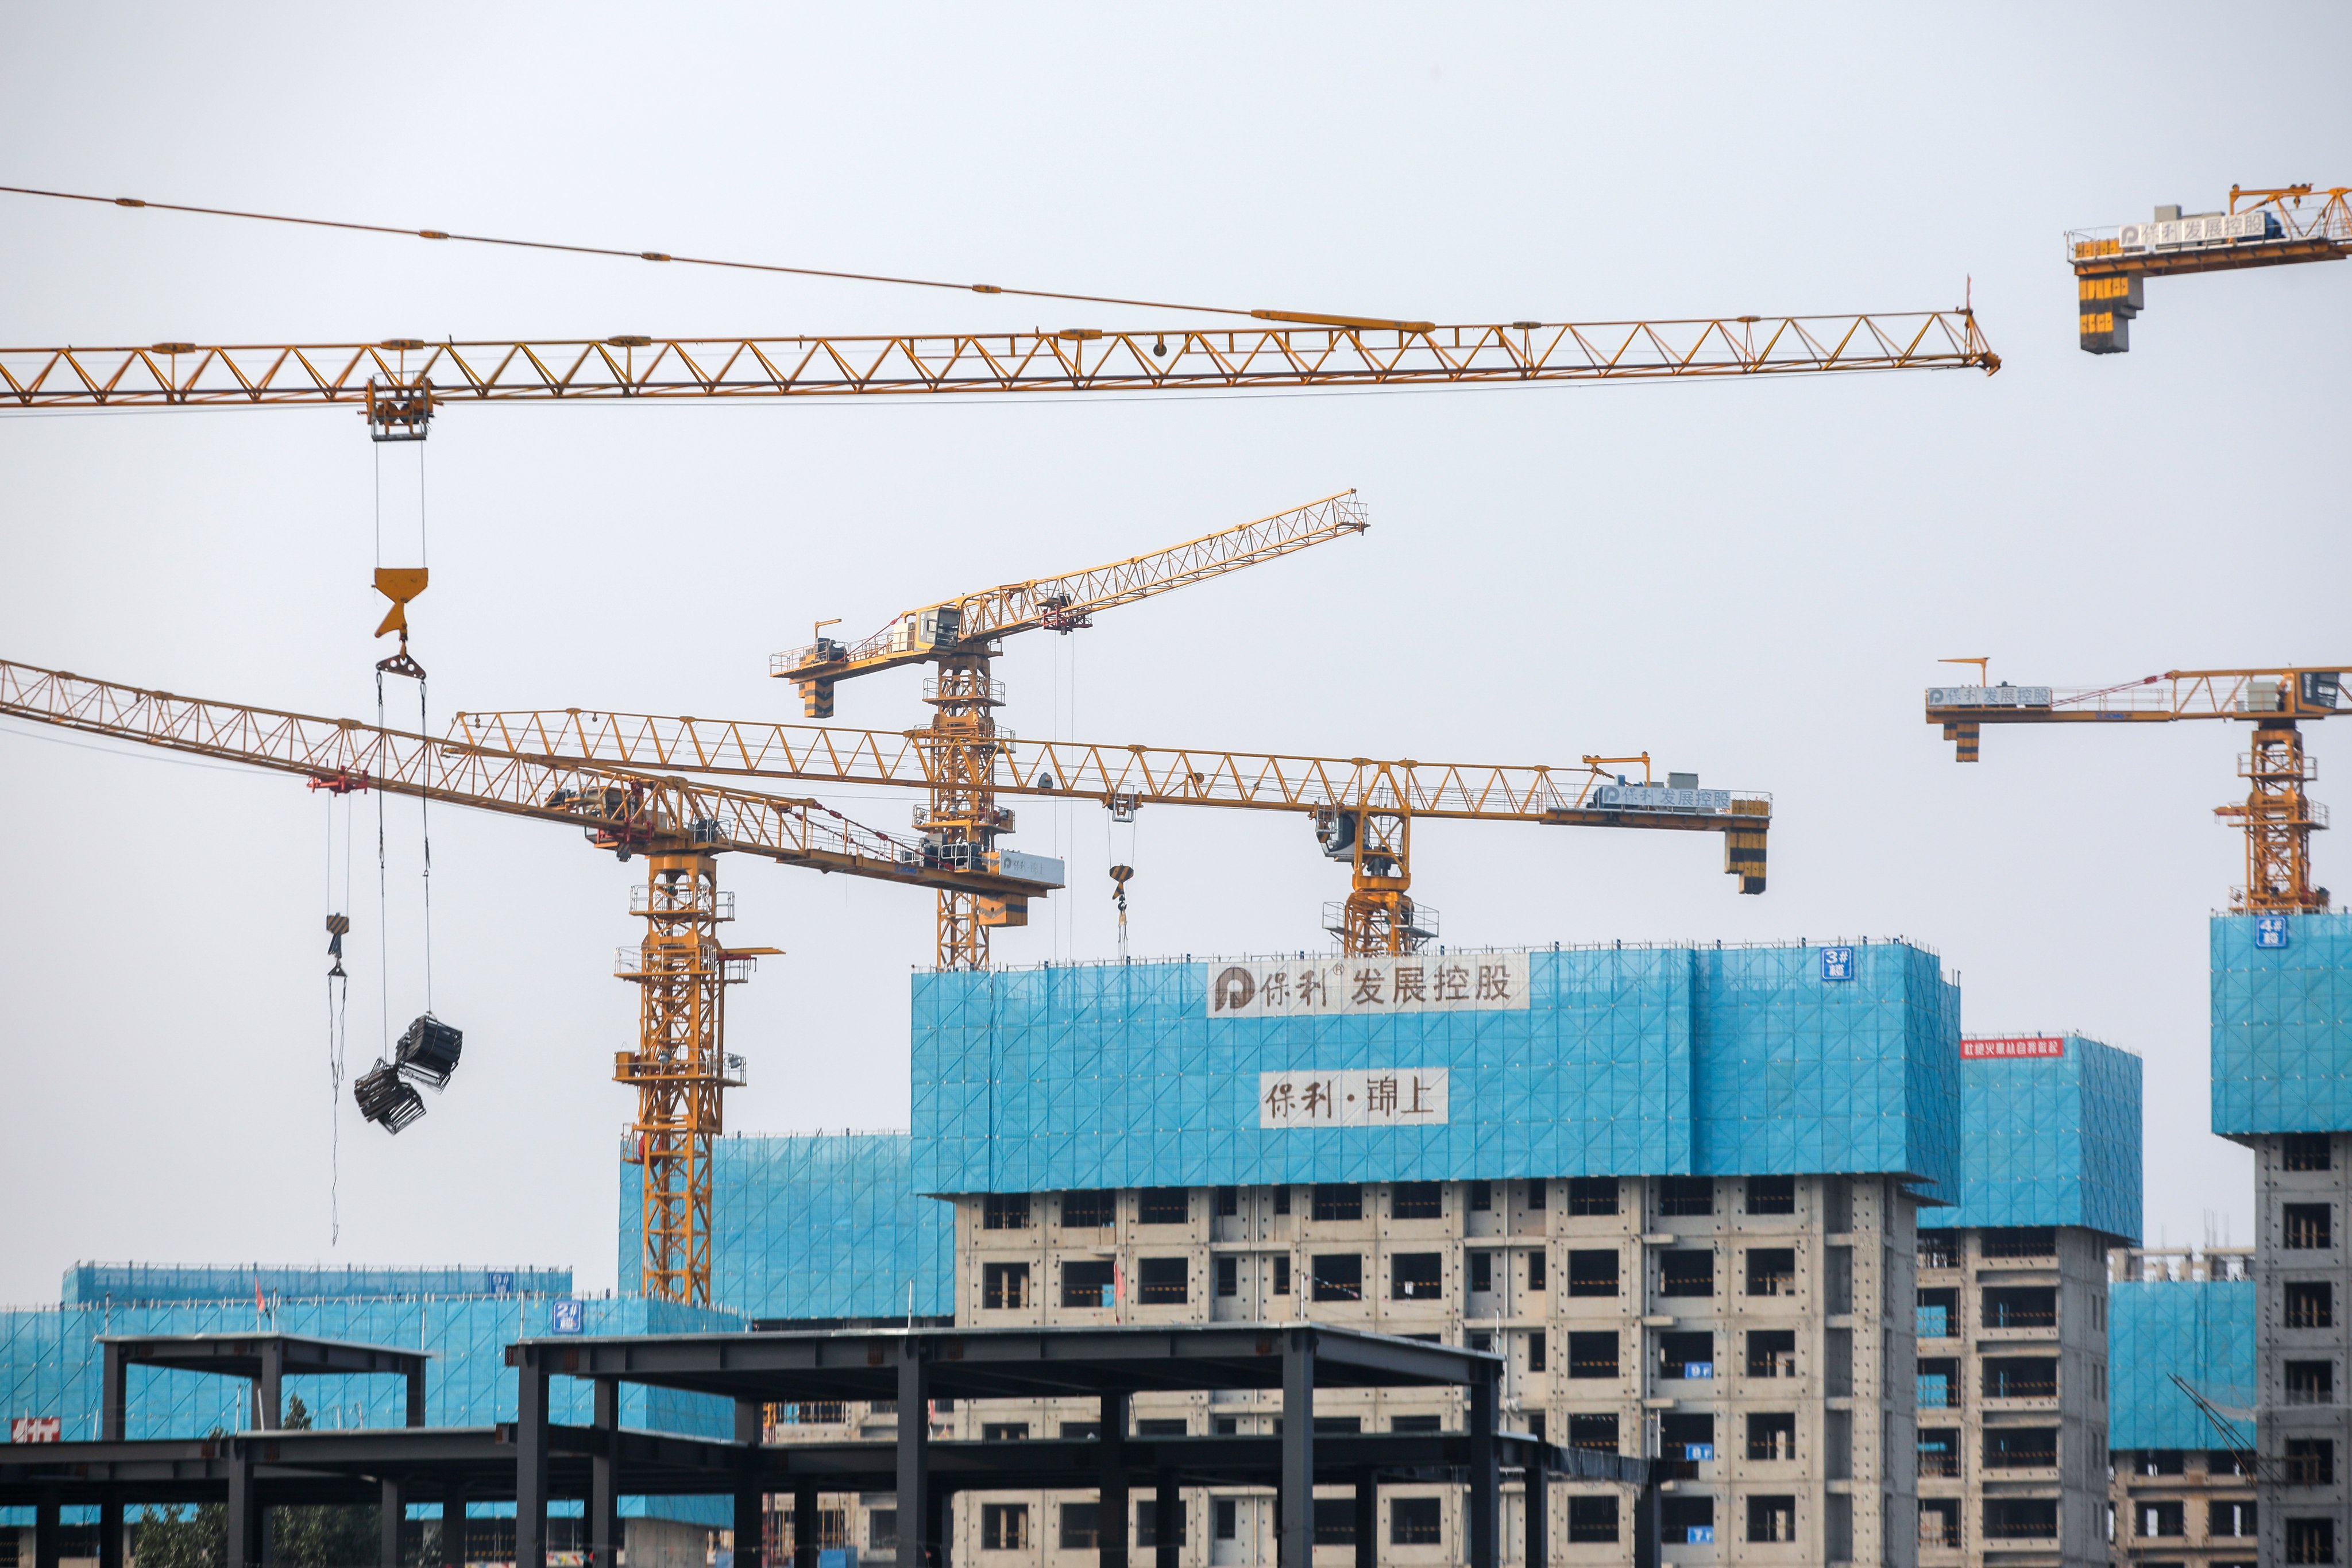 Buildings under construction in Beijing. Currently, 23 A-share developers have revealed share sale plans for raising more than 92.5 billion yuan, but only a few have been given approvals so far, according to Guosheng Securities. Photo: EPA-EFE